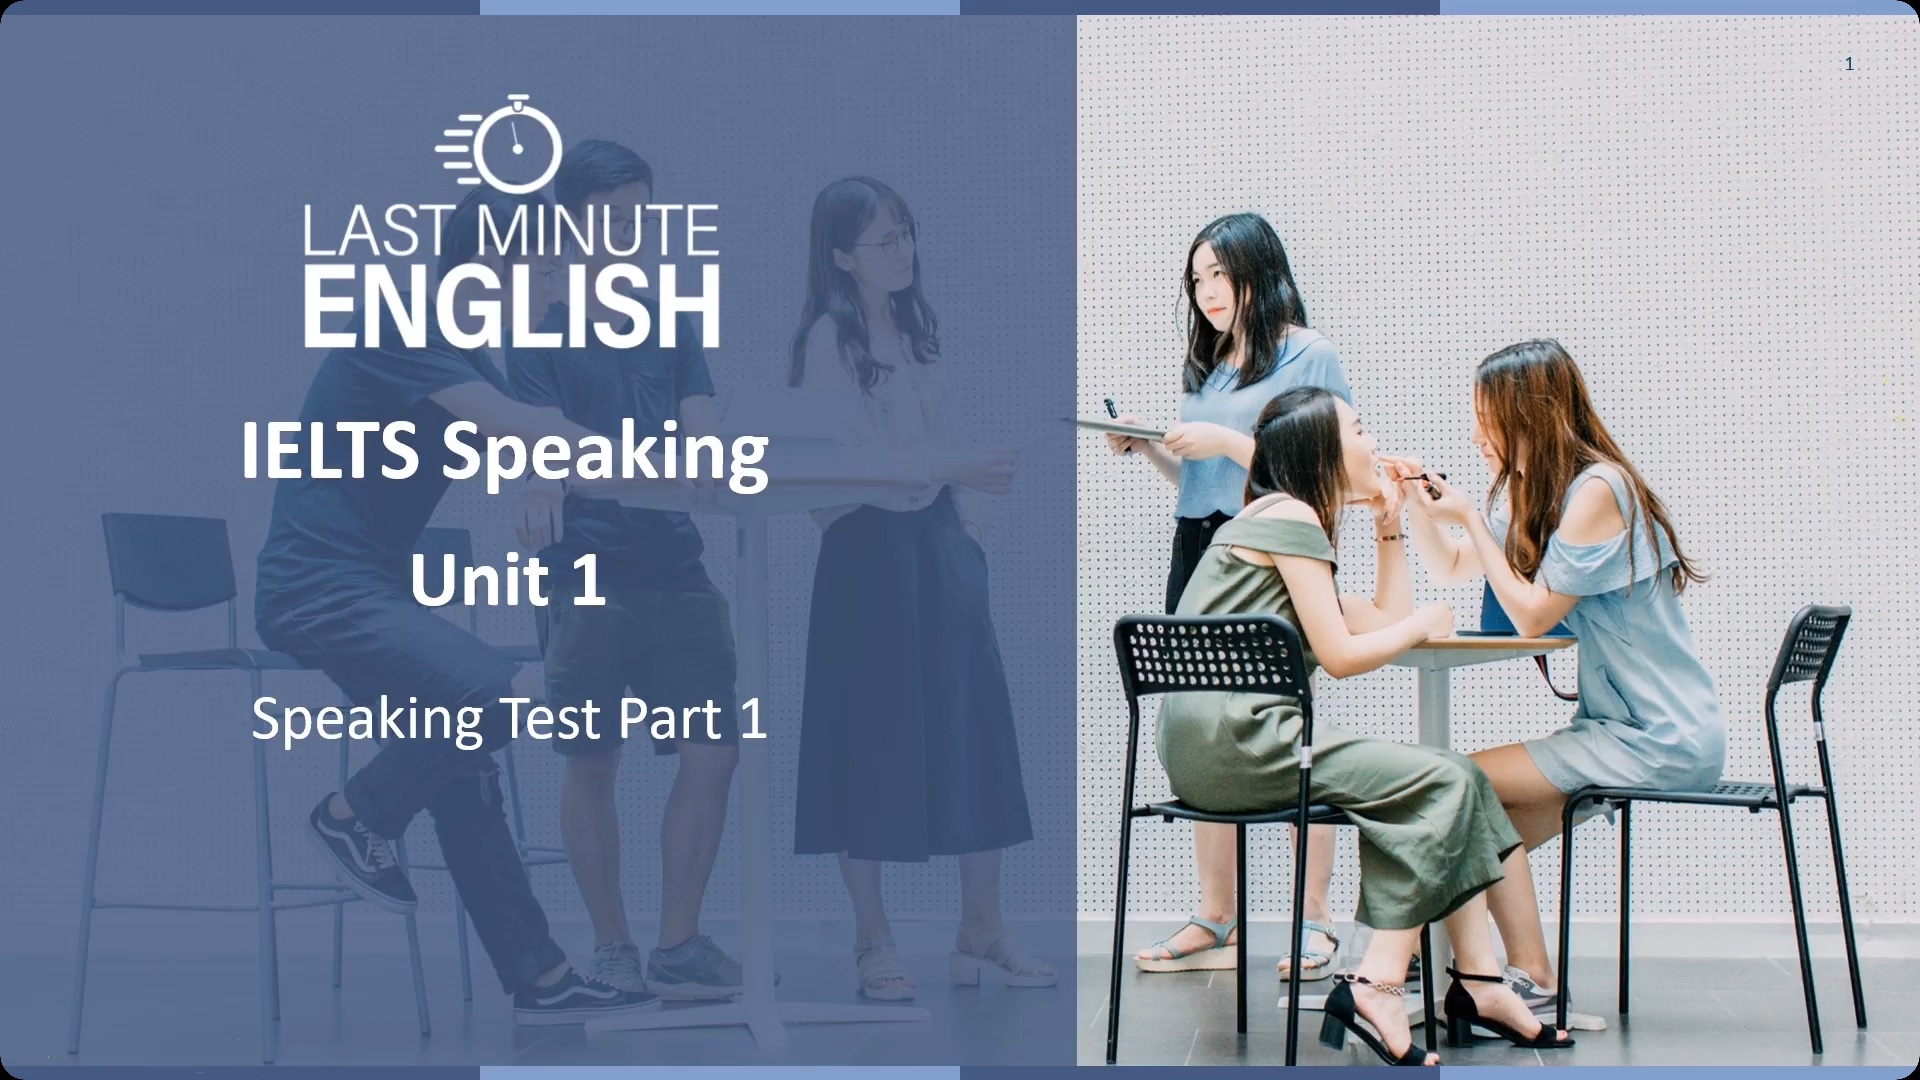 IELTS Speaking Test: Introduction to Part 1